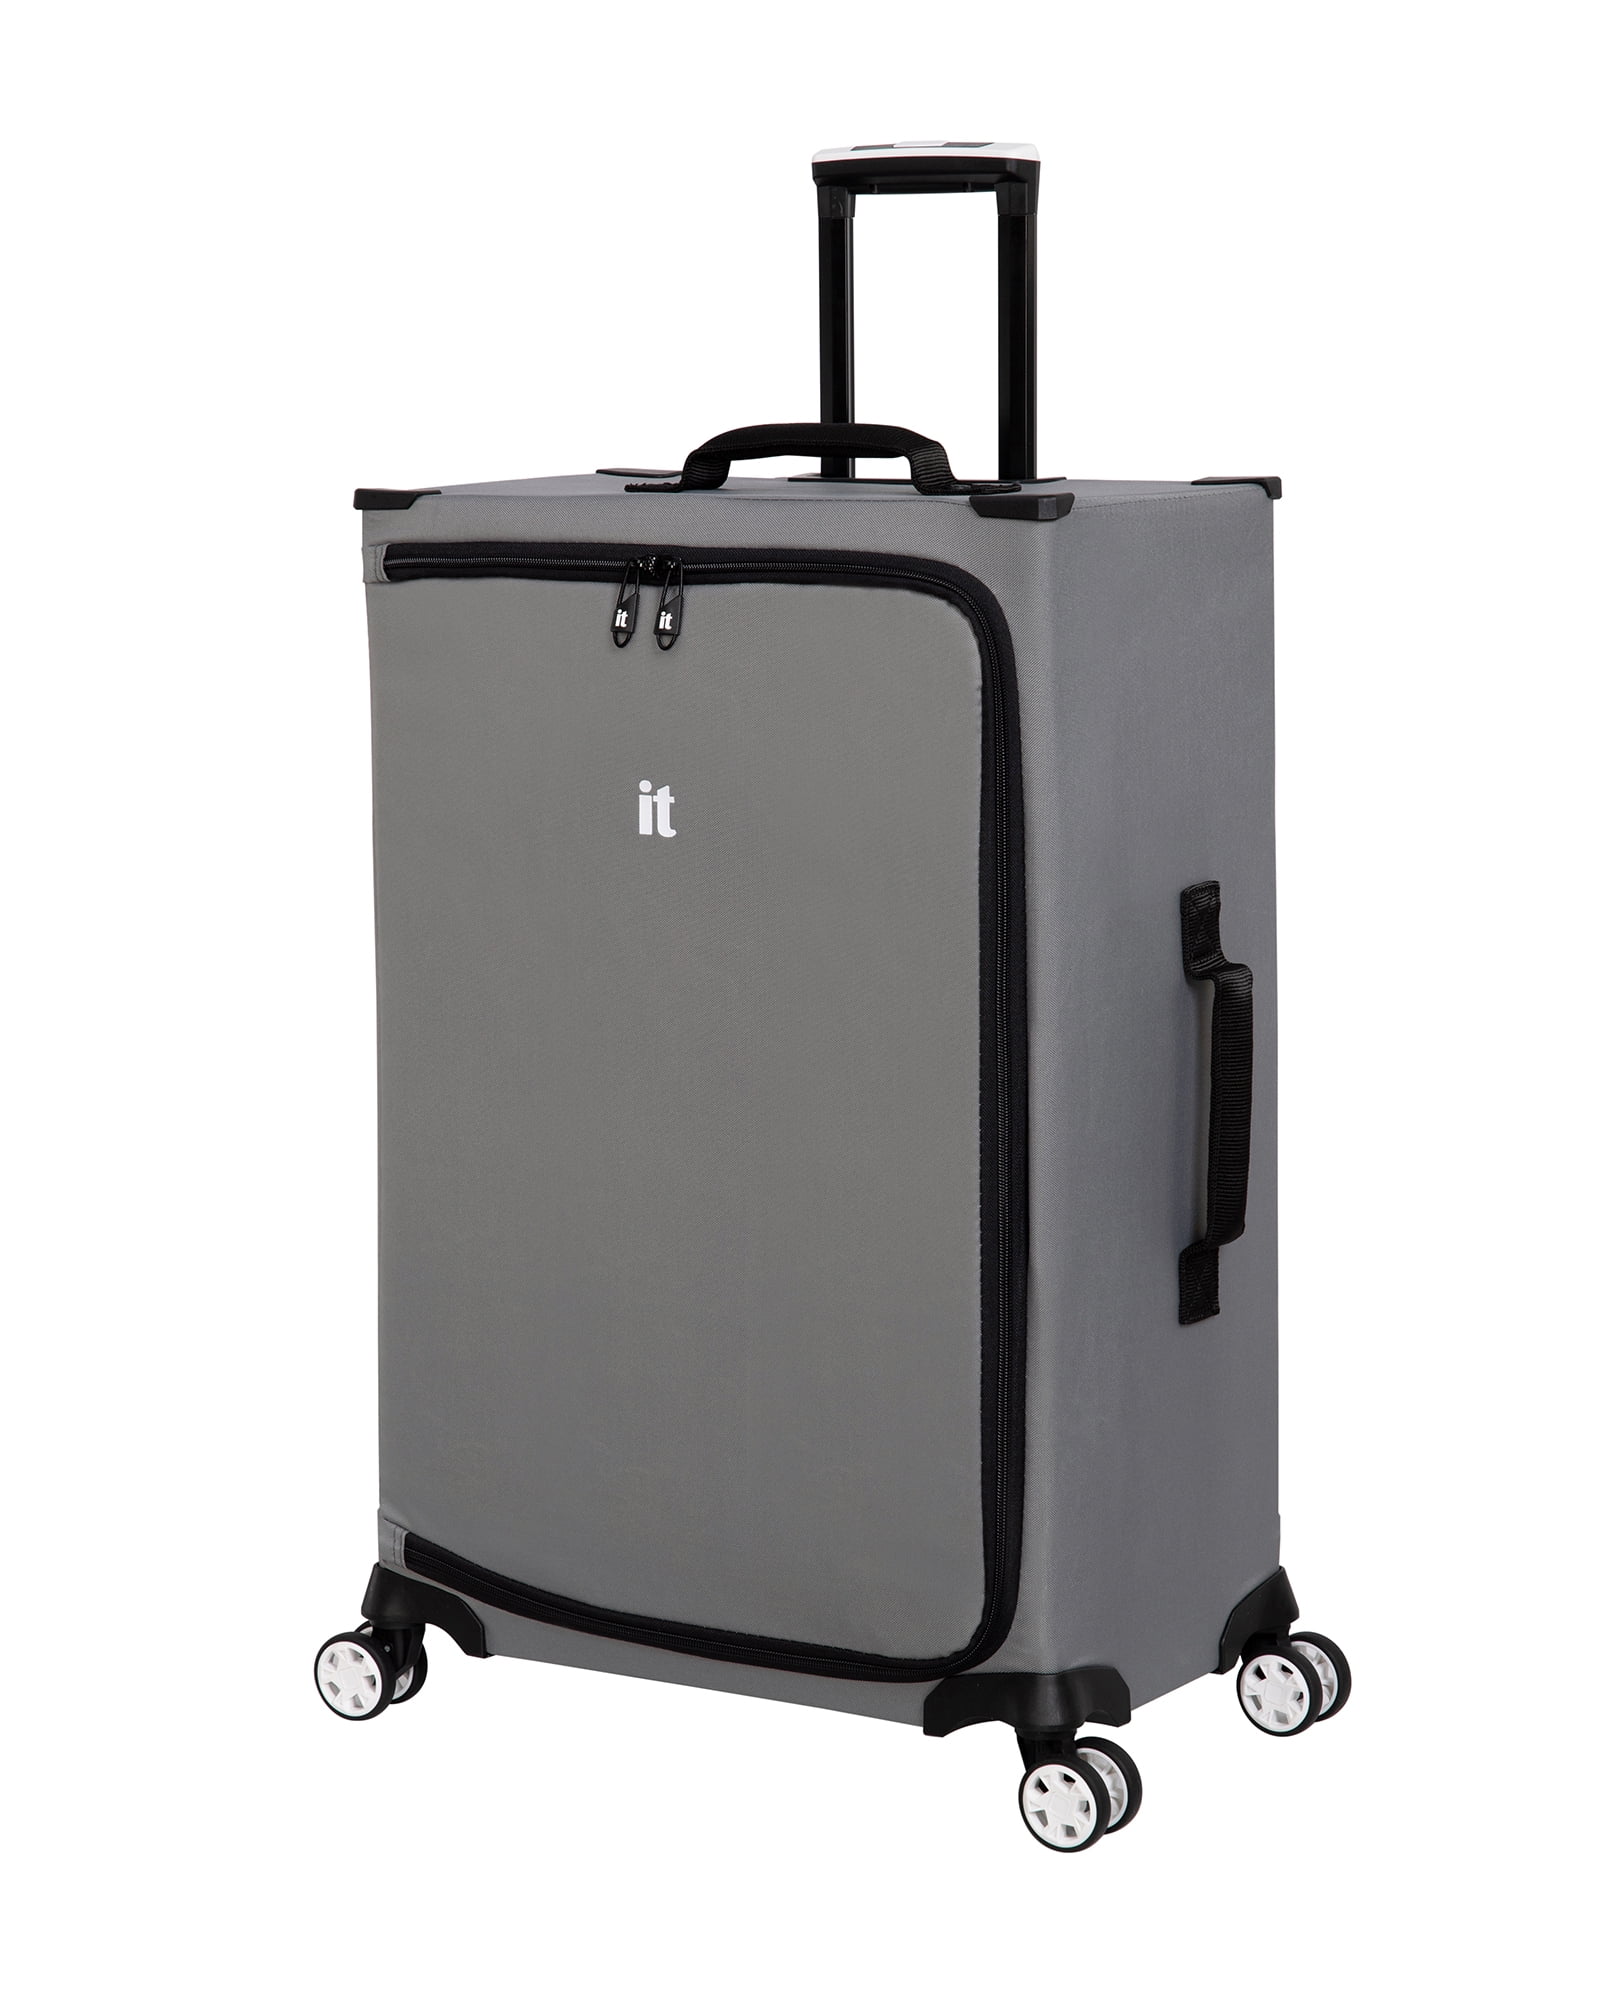 It Luggage MaXpace 27 Softside Spinner Luggage | lupon.gov.ph